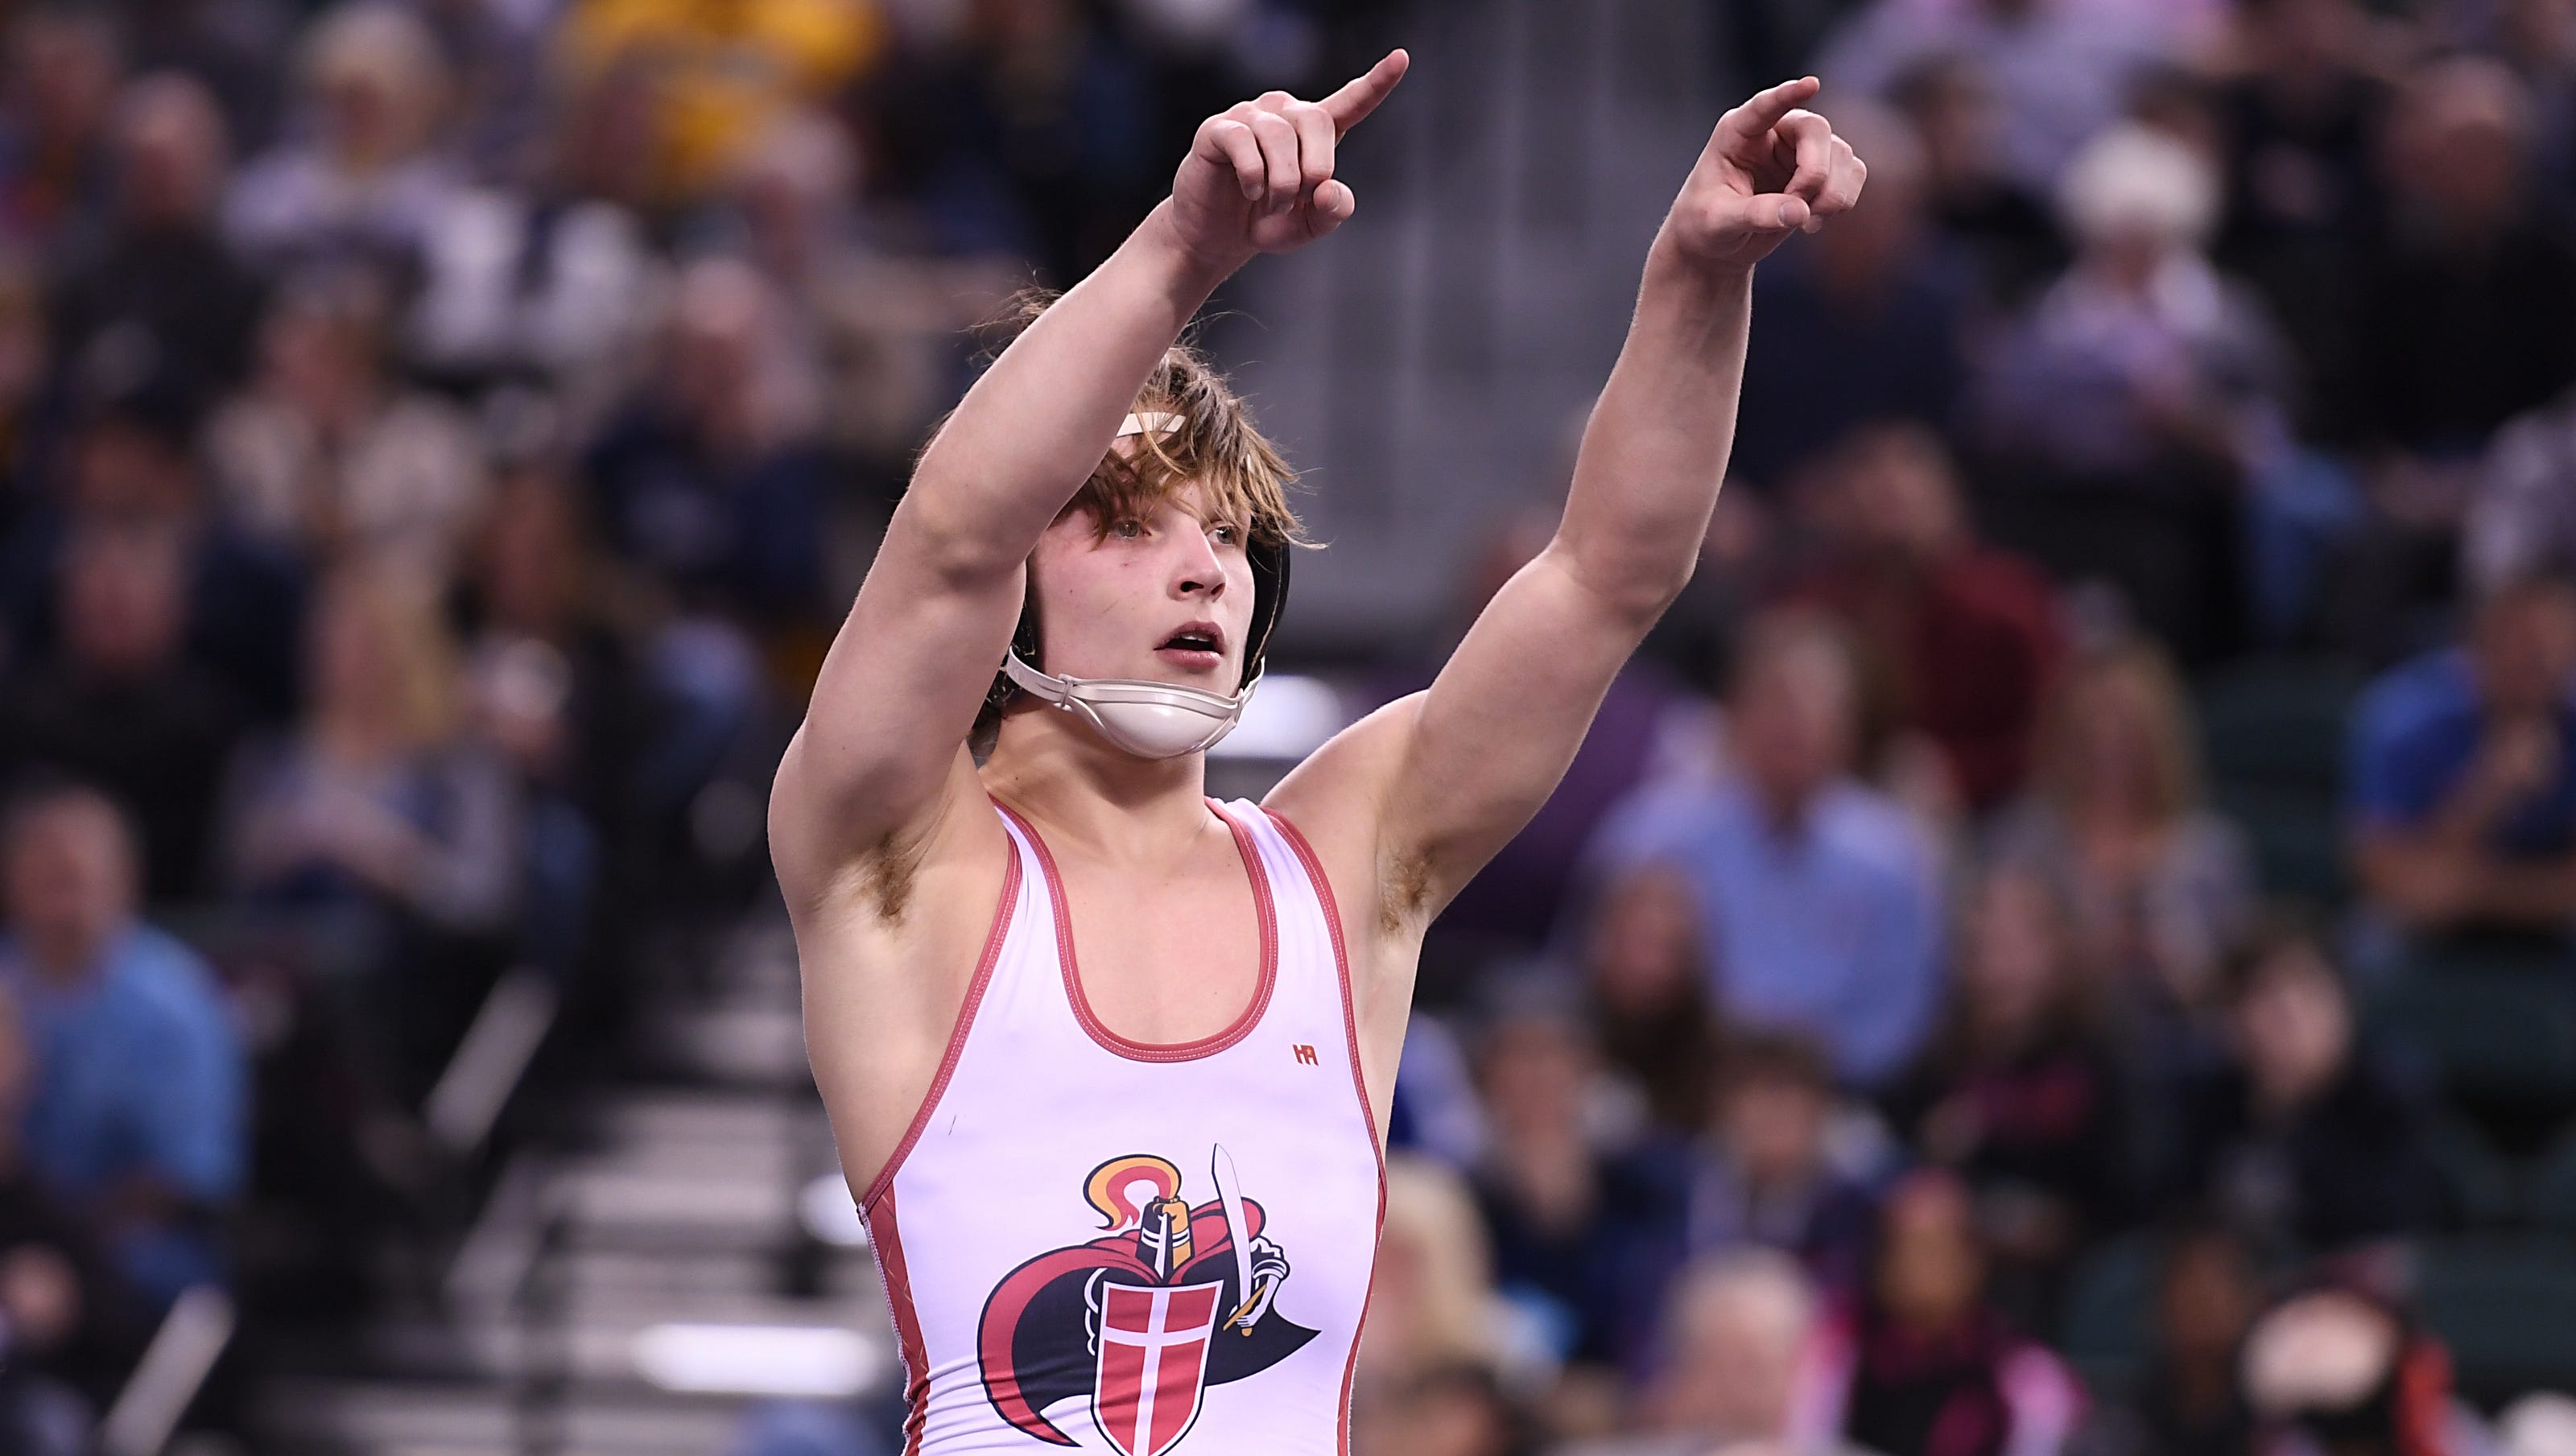 NJ state wrestling tournament Weightbyweight preview